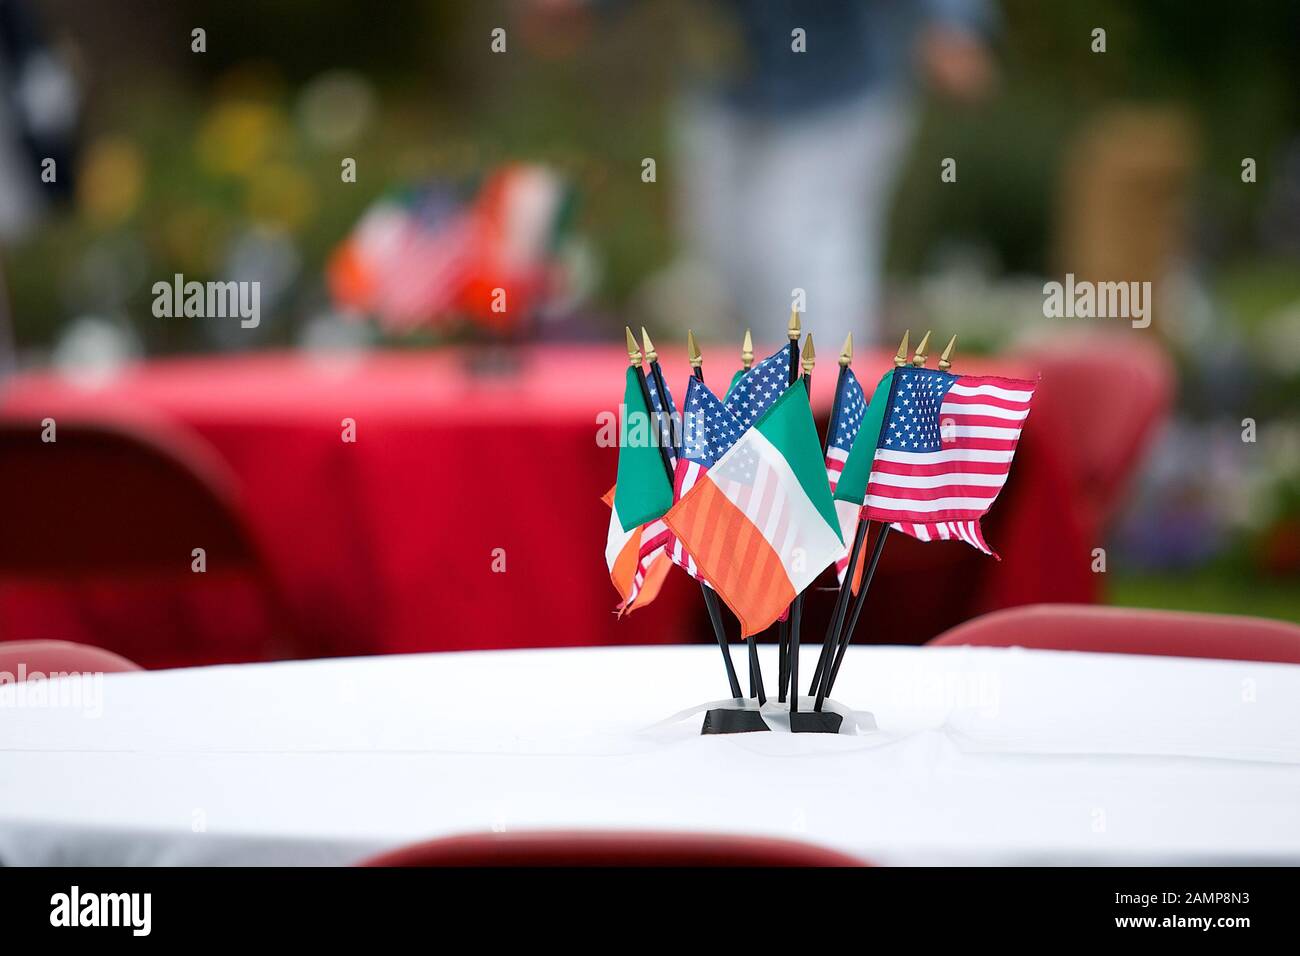 Miniature Irish and American flags used as a table decoration at a 4th of July party. Stock Photo